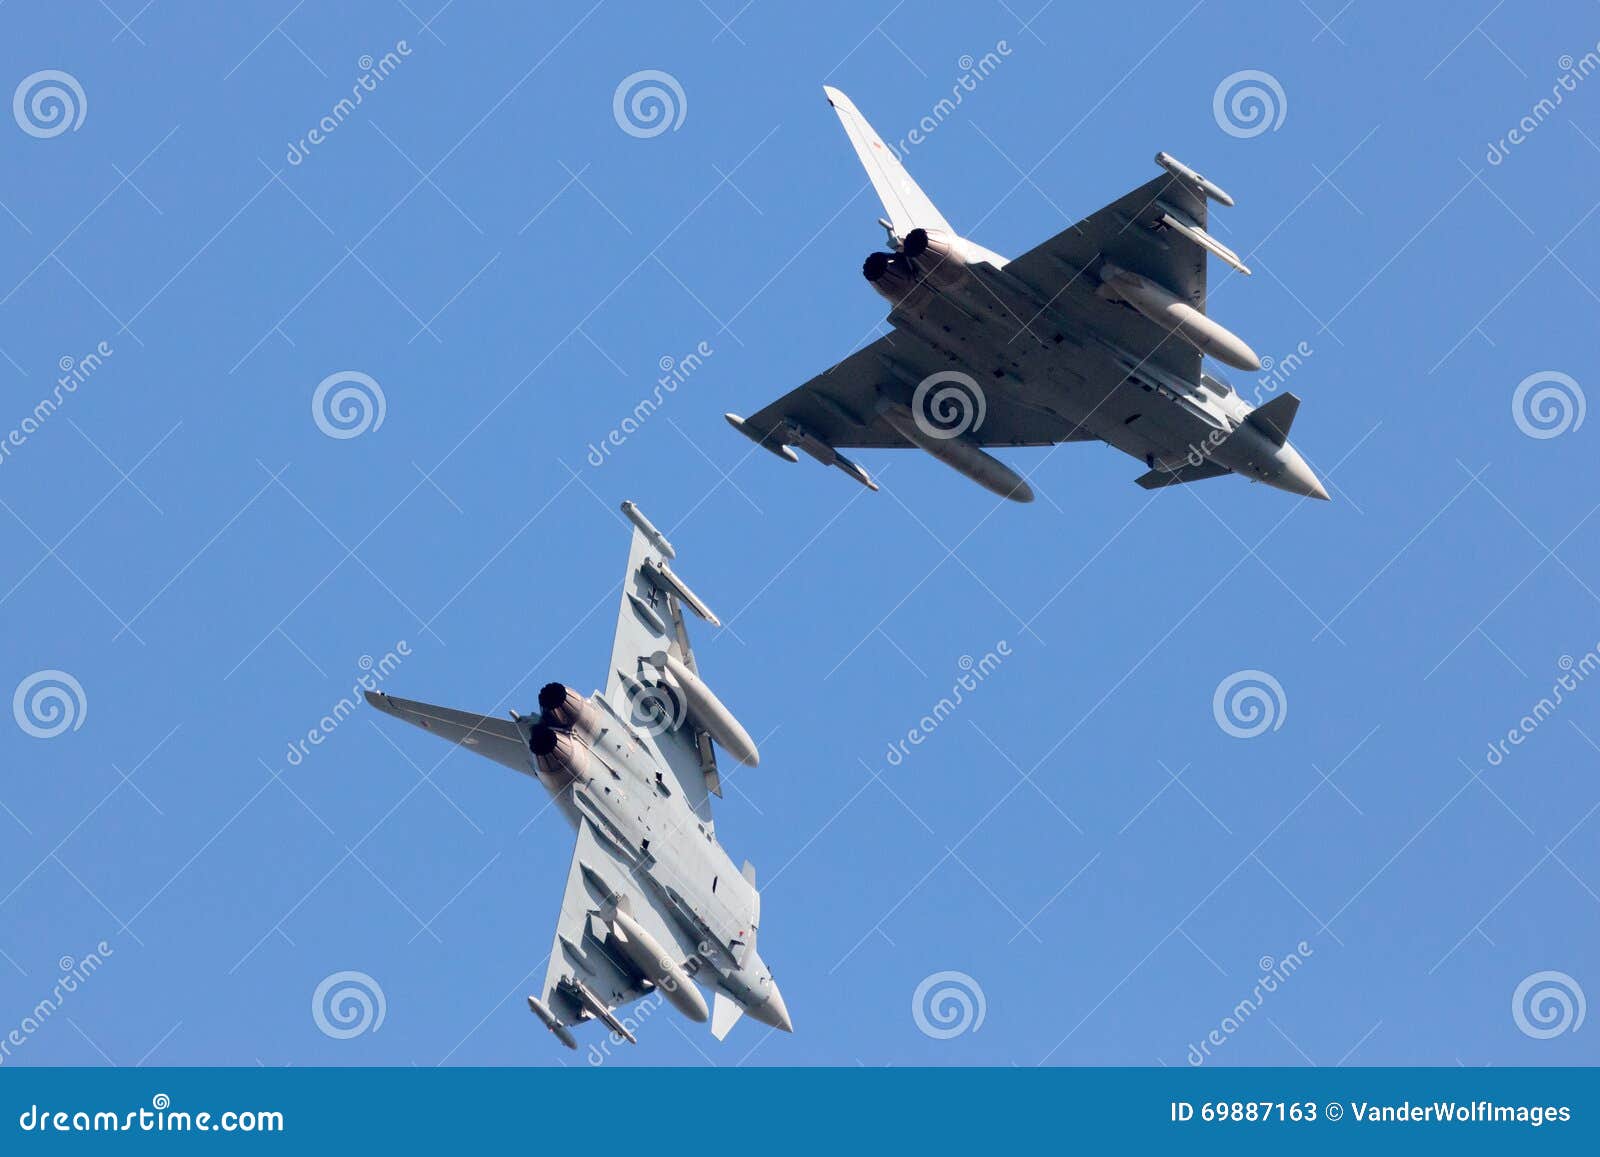 two fighter jets sky